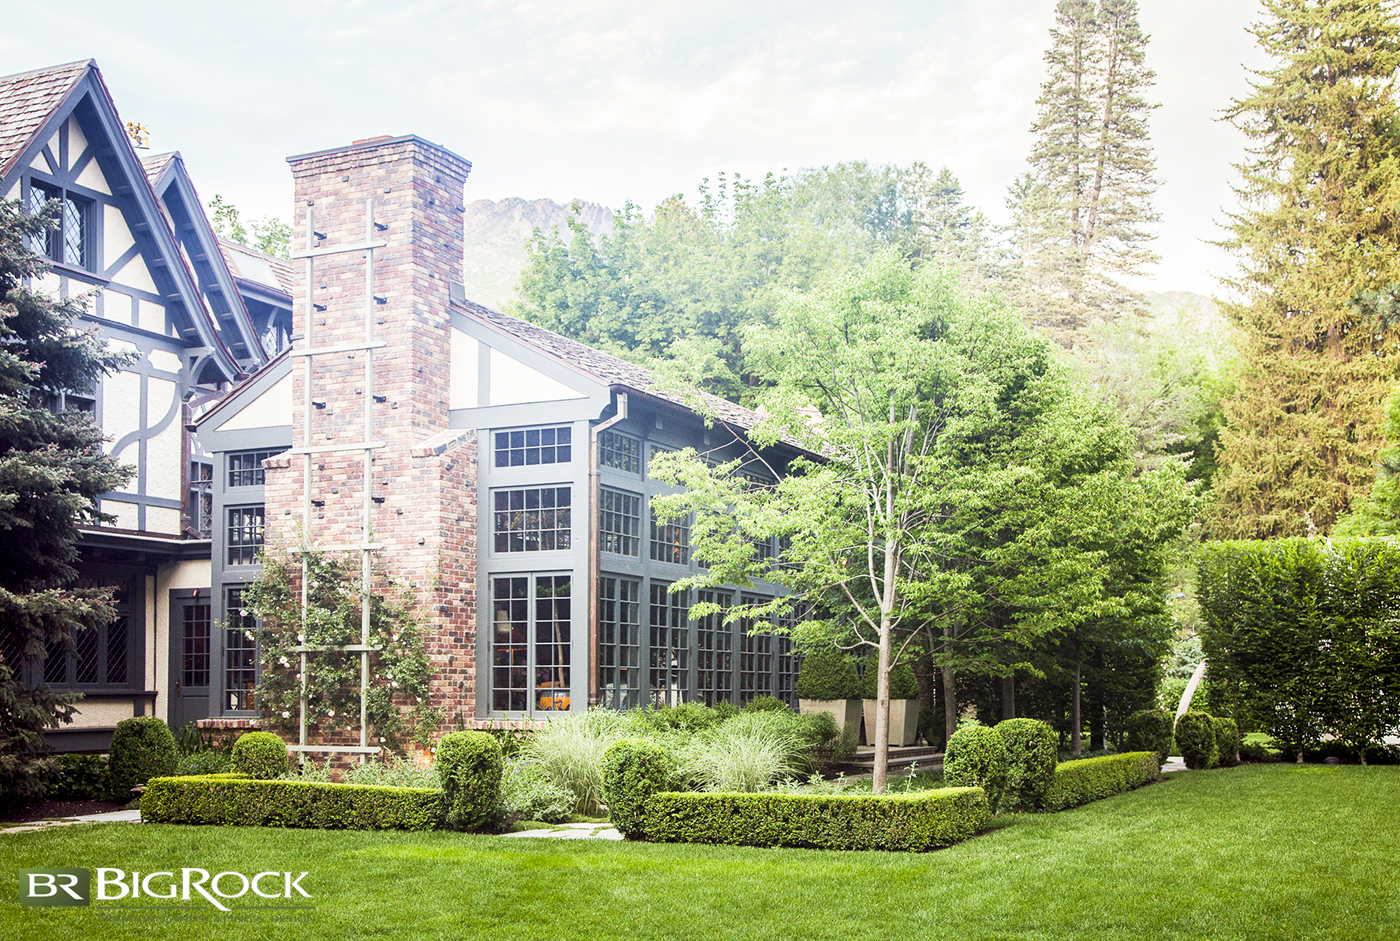 Big Rock Premium Landscaping and Design will bring a well manicured landscape design to your luxury landscape while incorporating elements that will match your home aesthetic.